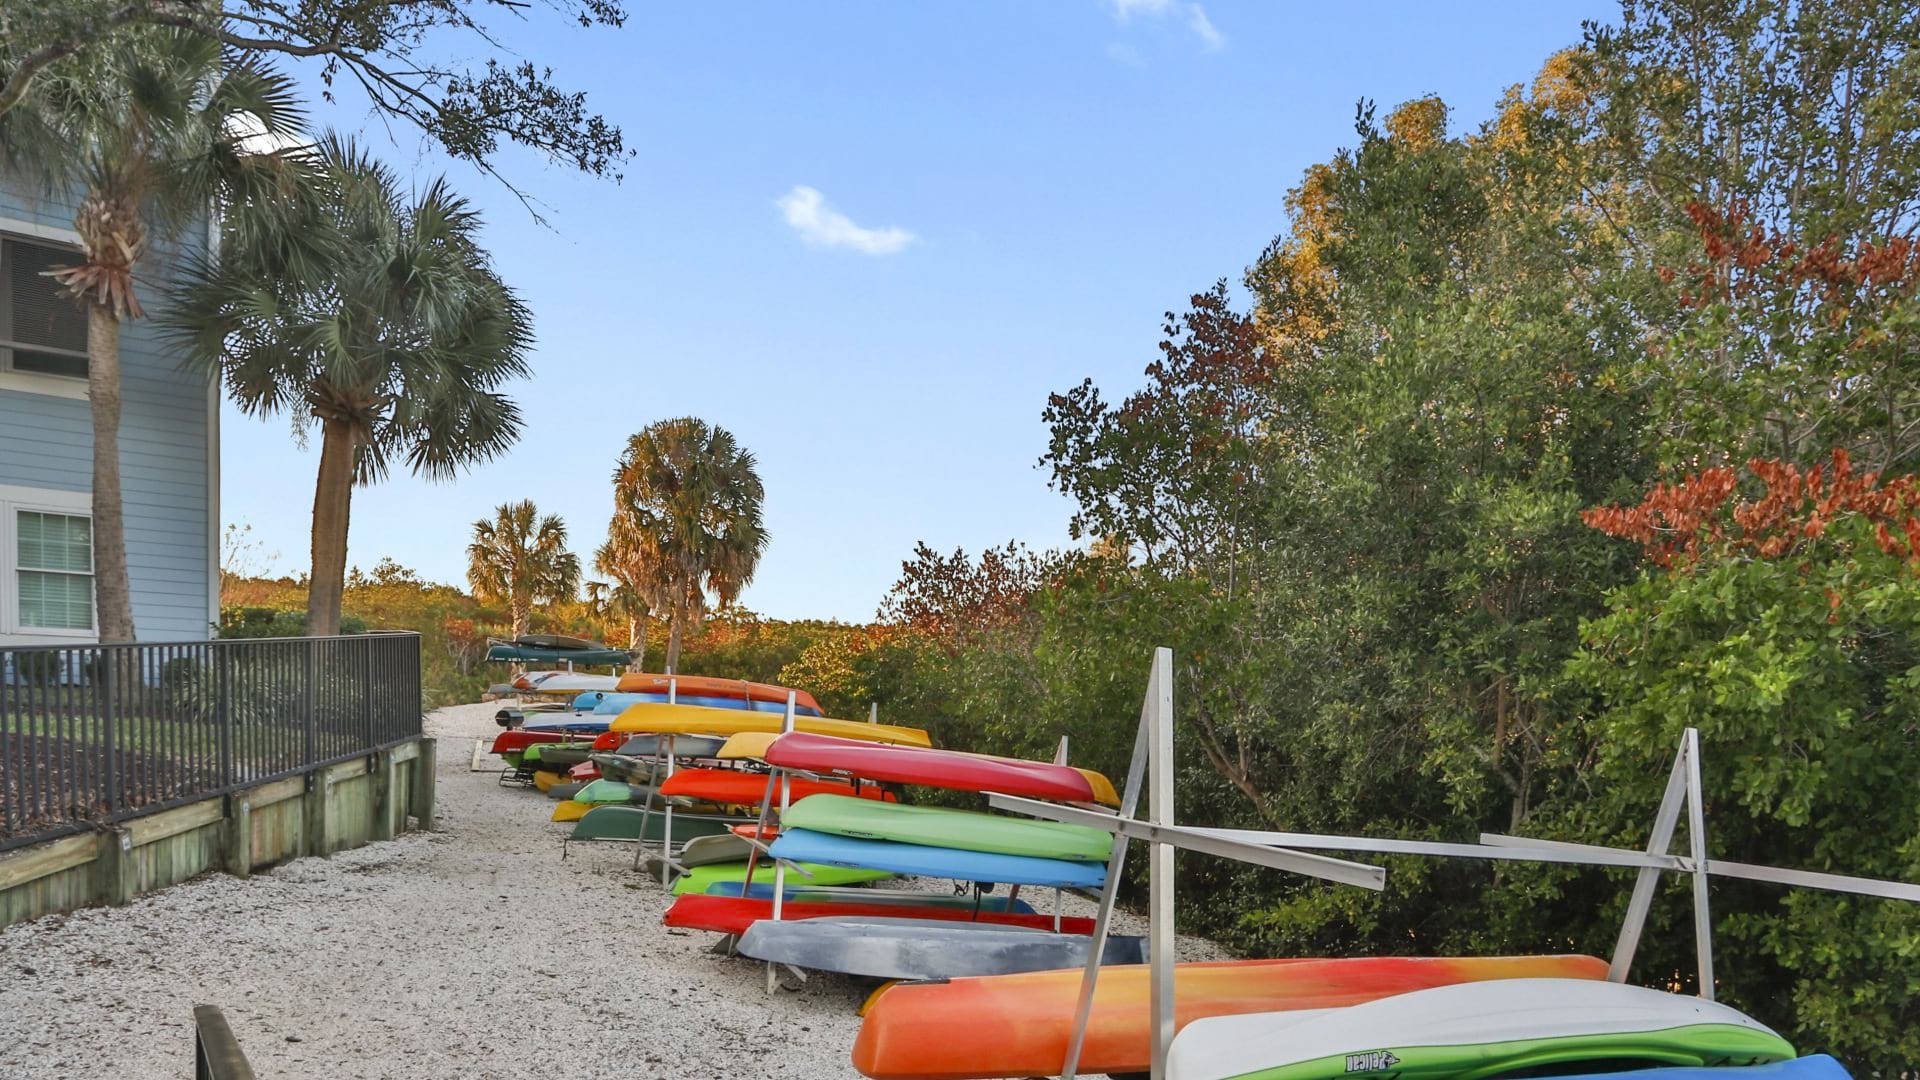 Canoe Storage at Our Waterfront Apartments in South Tampa 